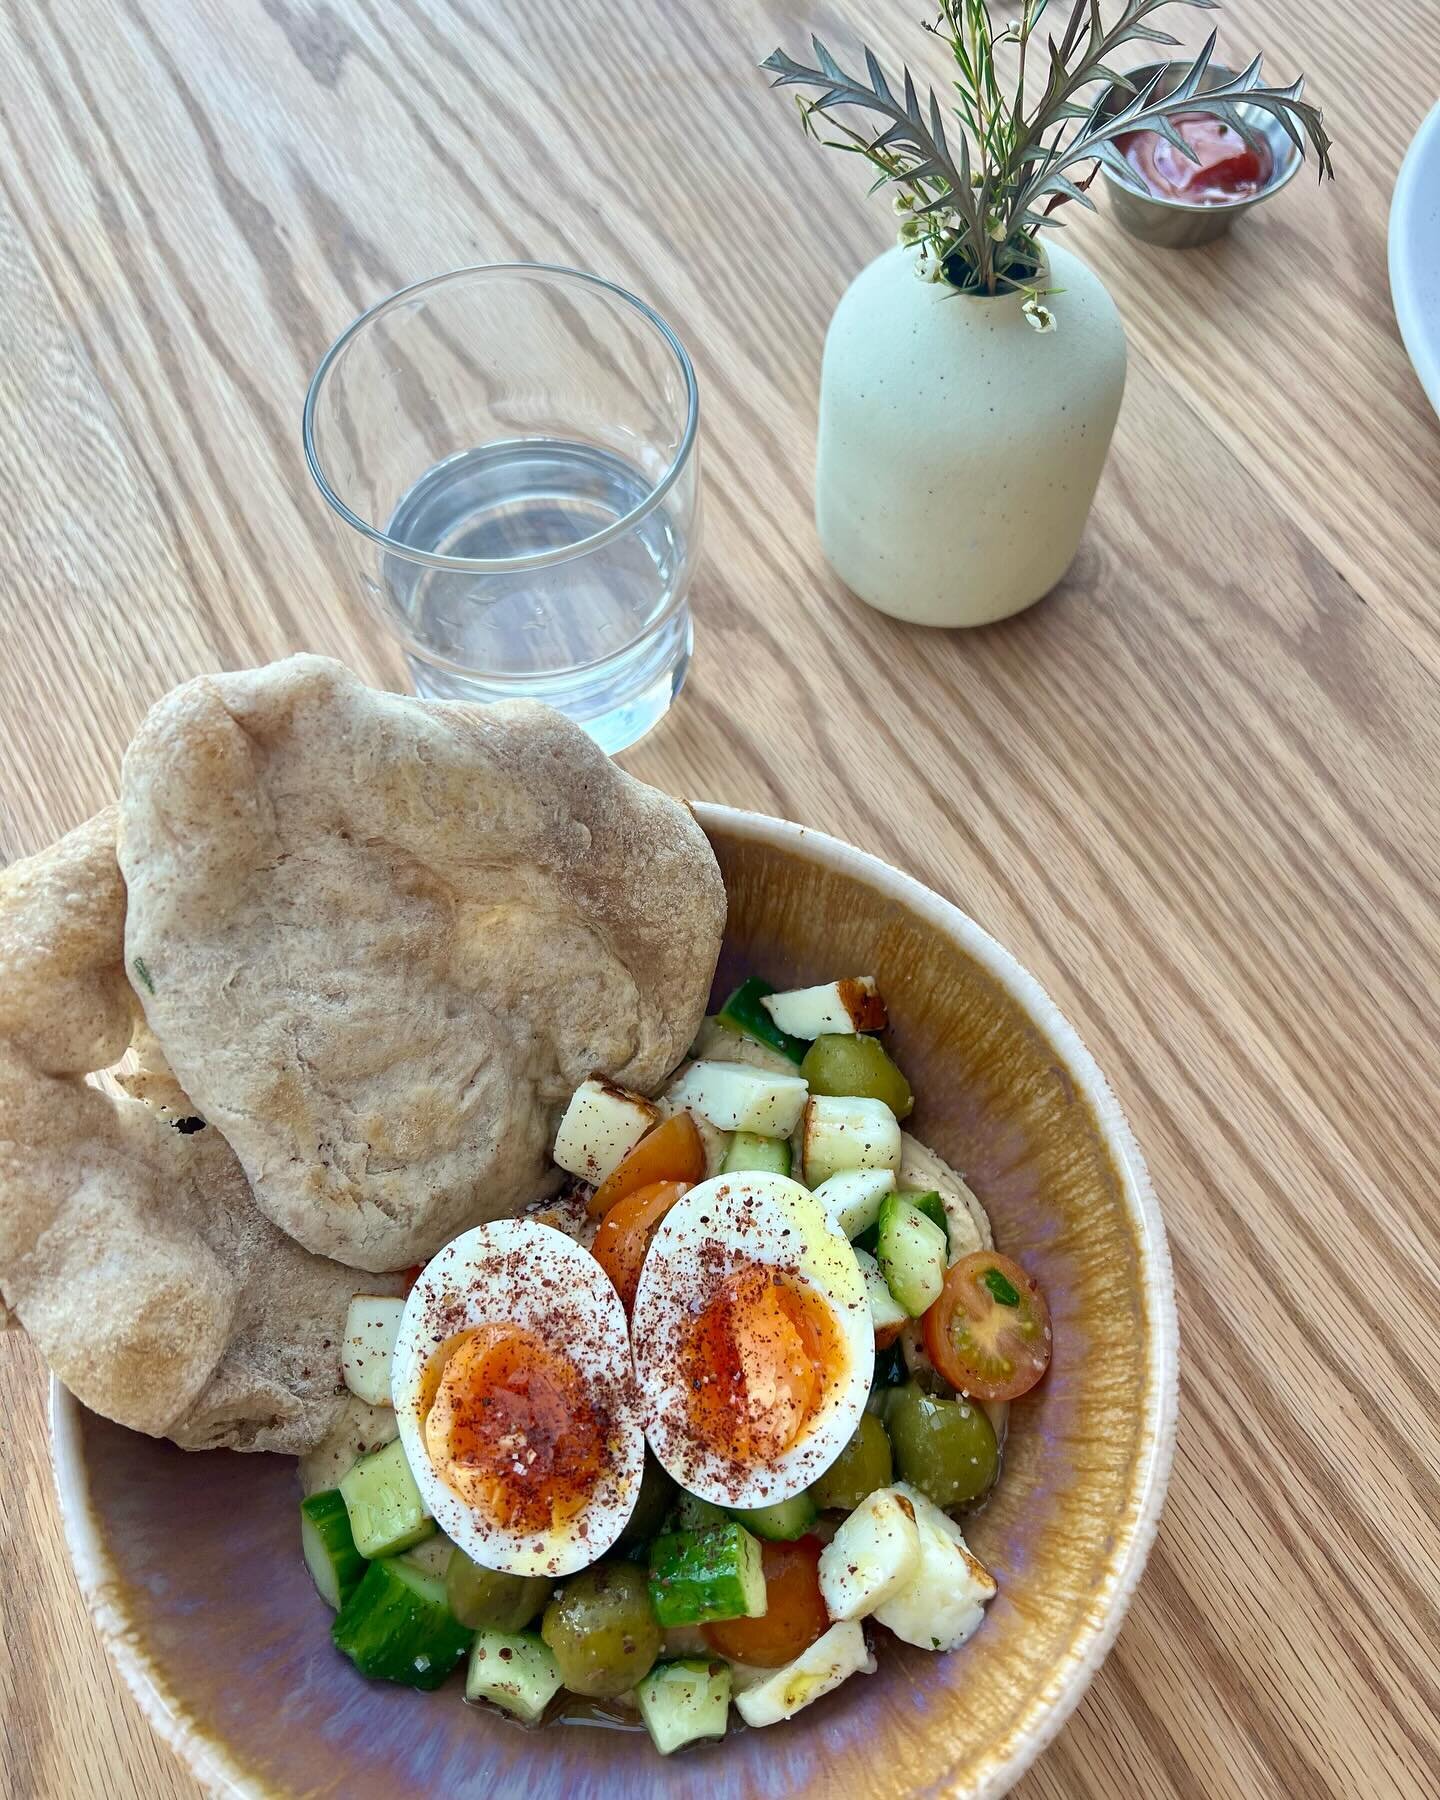 When your breakfast resembles a smiley face 😊 
Soft boiled egg + hummus + green olives + tomatoes with a side of pita bread 🤌🏼